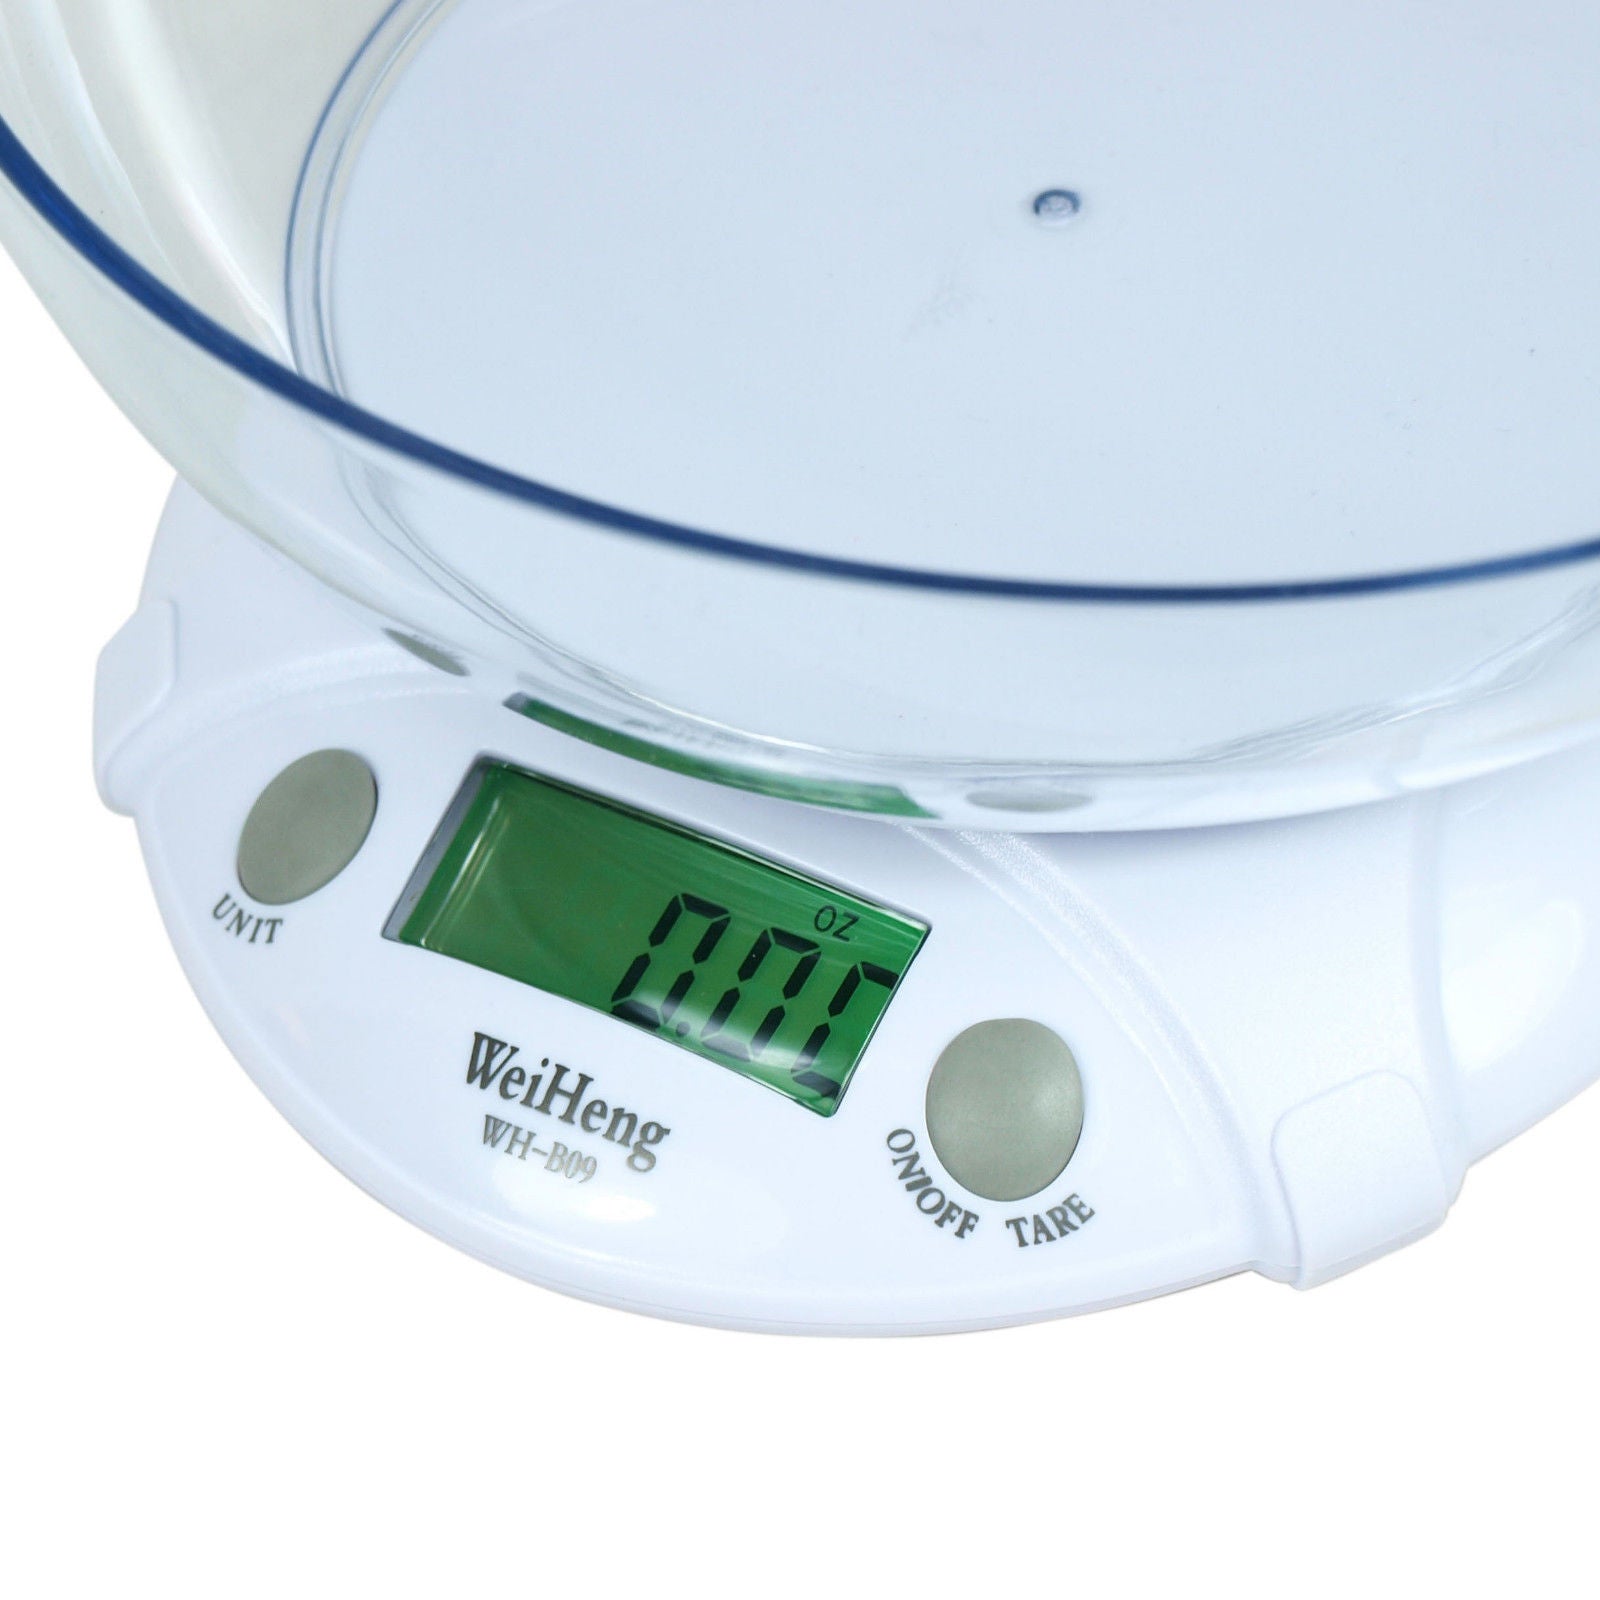 Kitchen, Digital Kitchen Scale With Bowl Food Scales 500g By 1g Accuracy  Scale